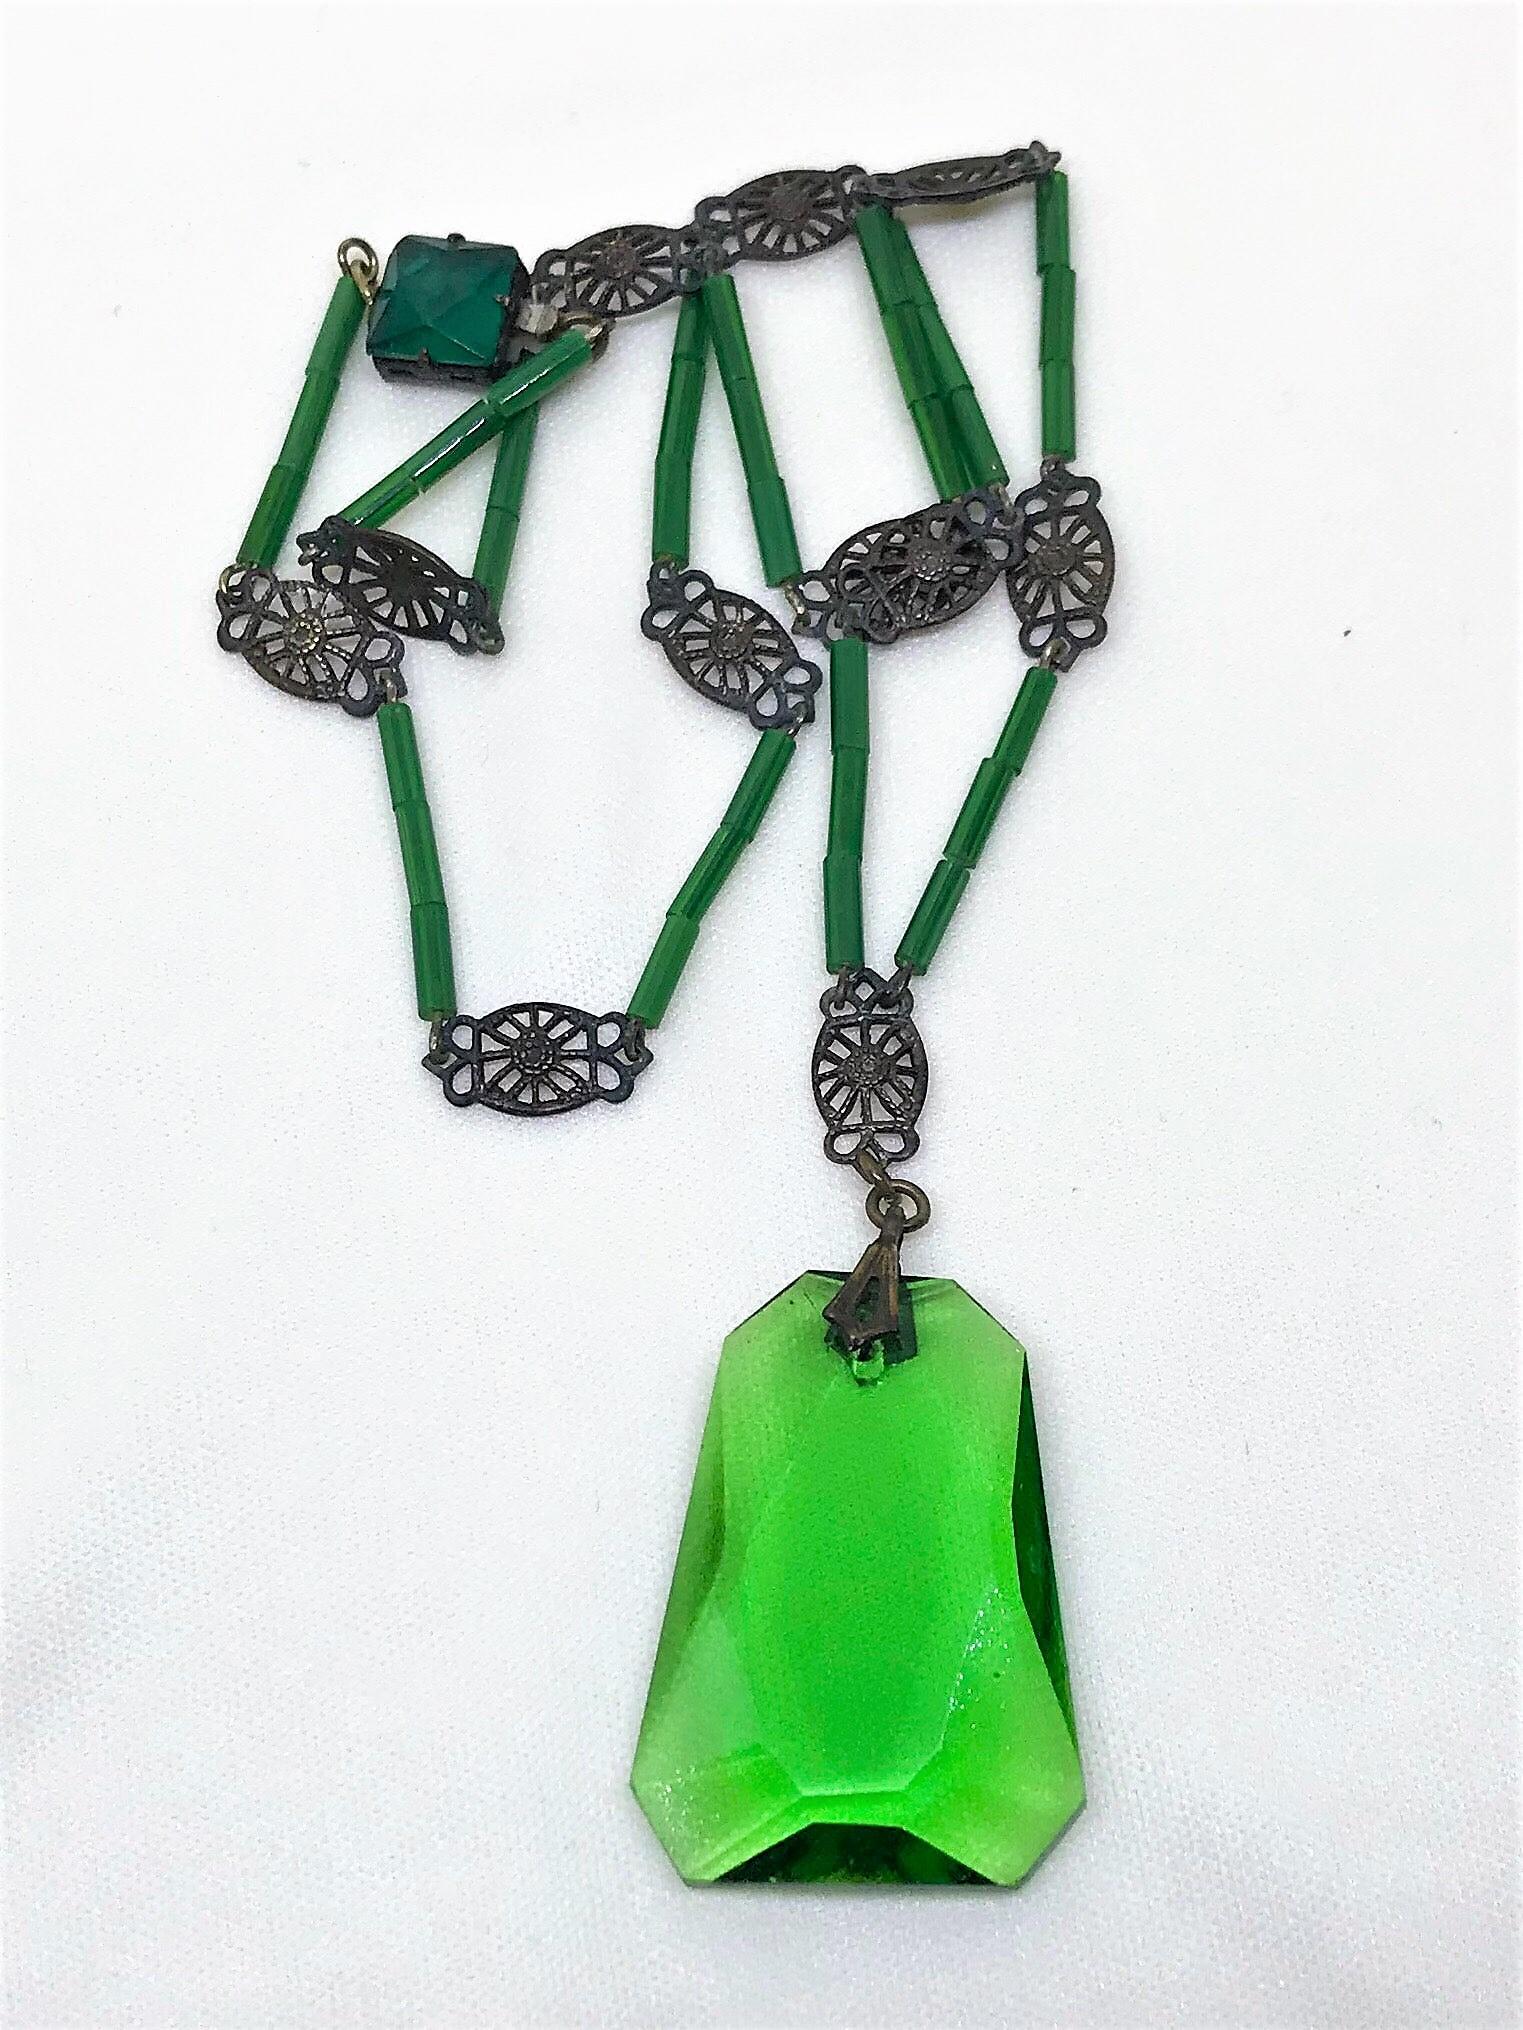 Circa 1920s Deco Era Green Faceted Glass Pendant Necklace  In Good Condition For Sale In Long Beach, CA